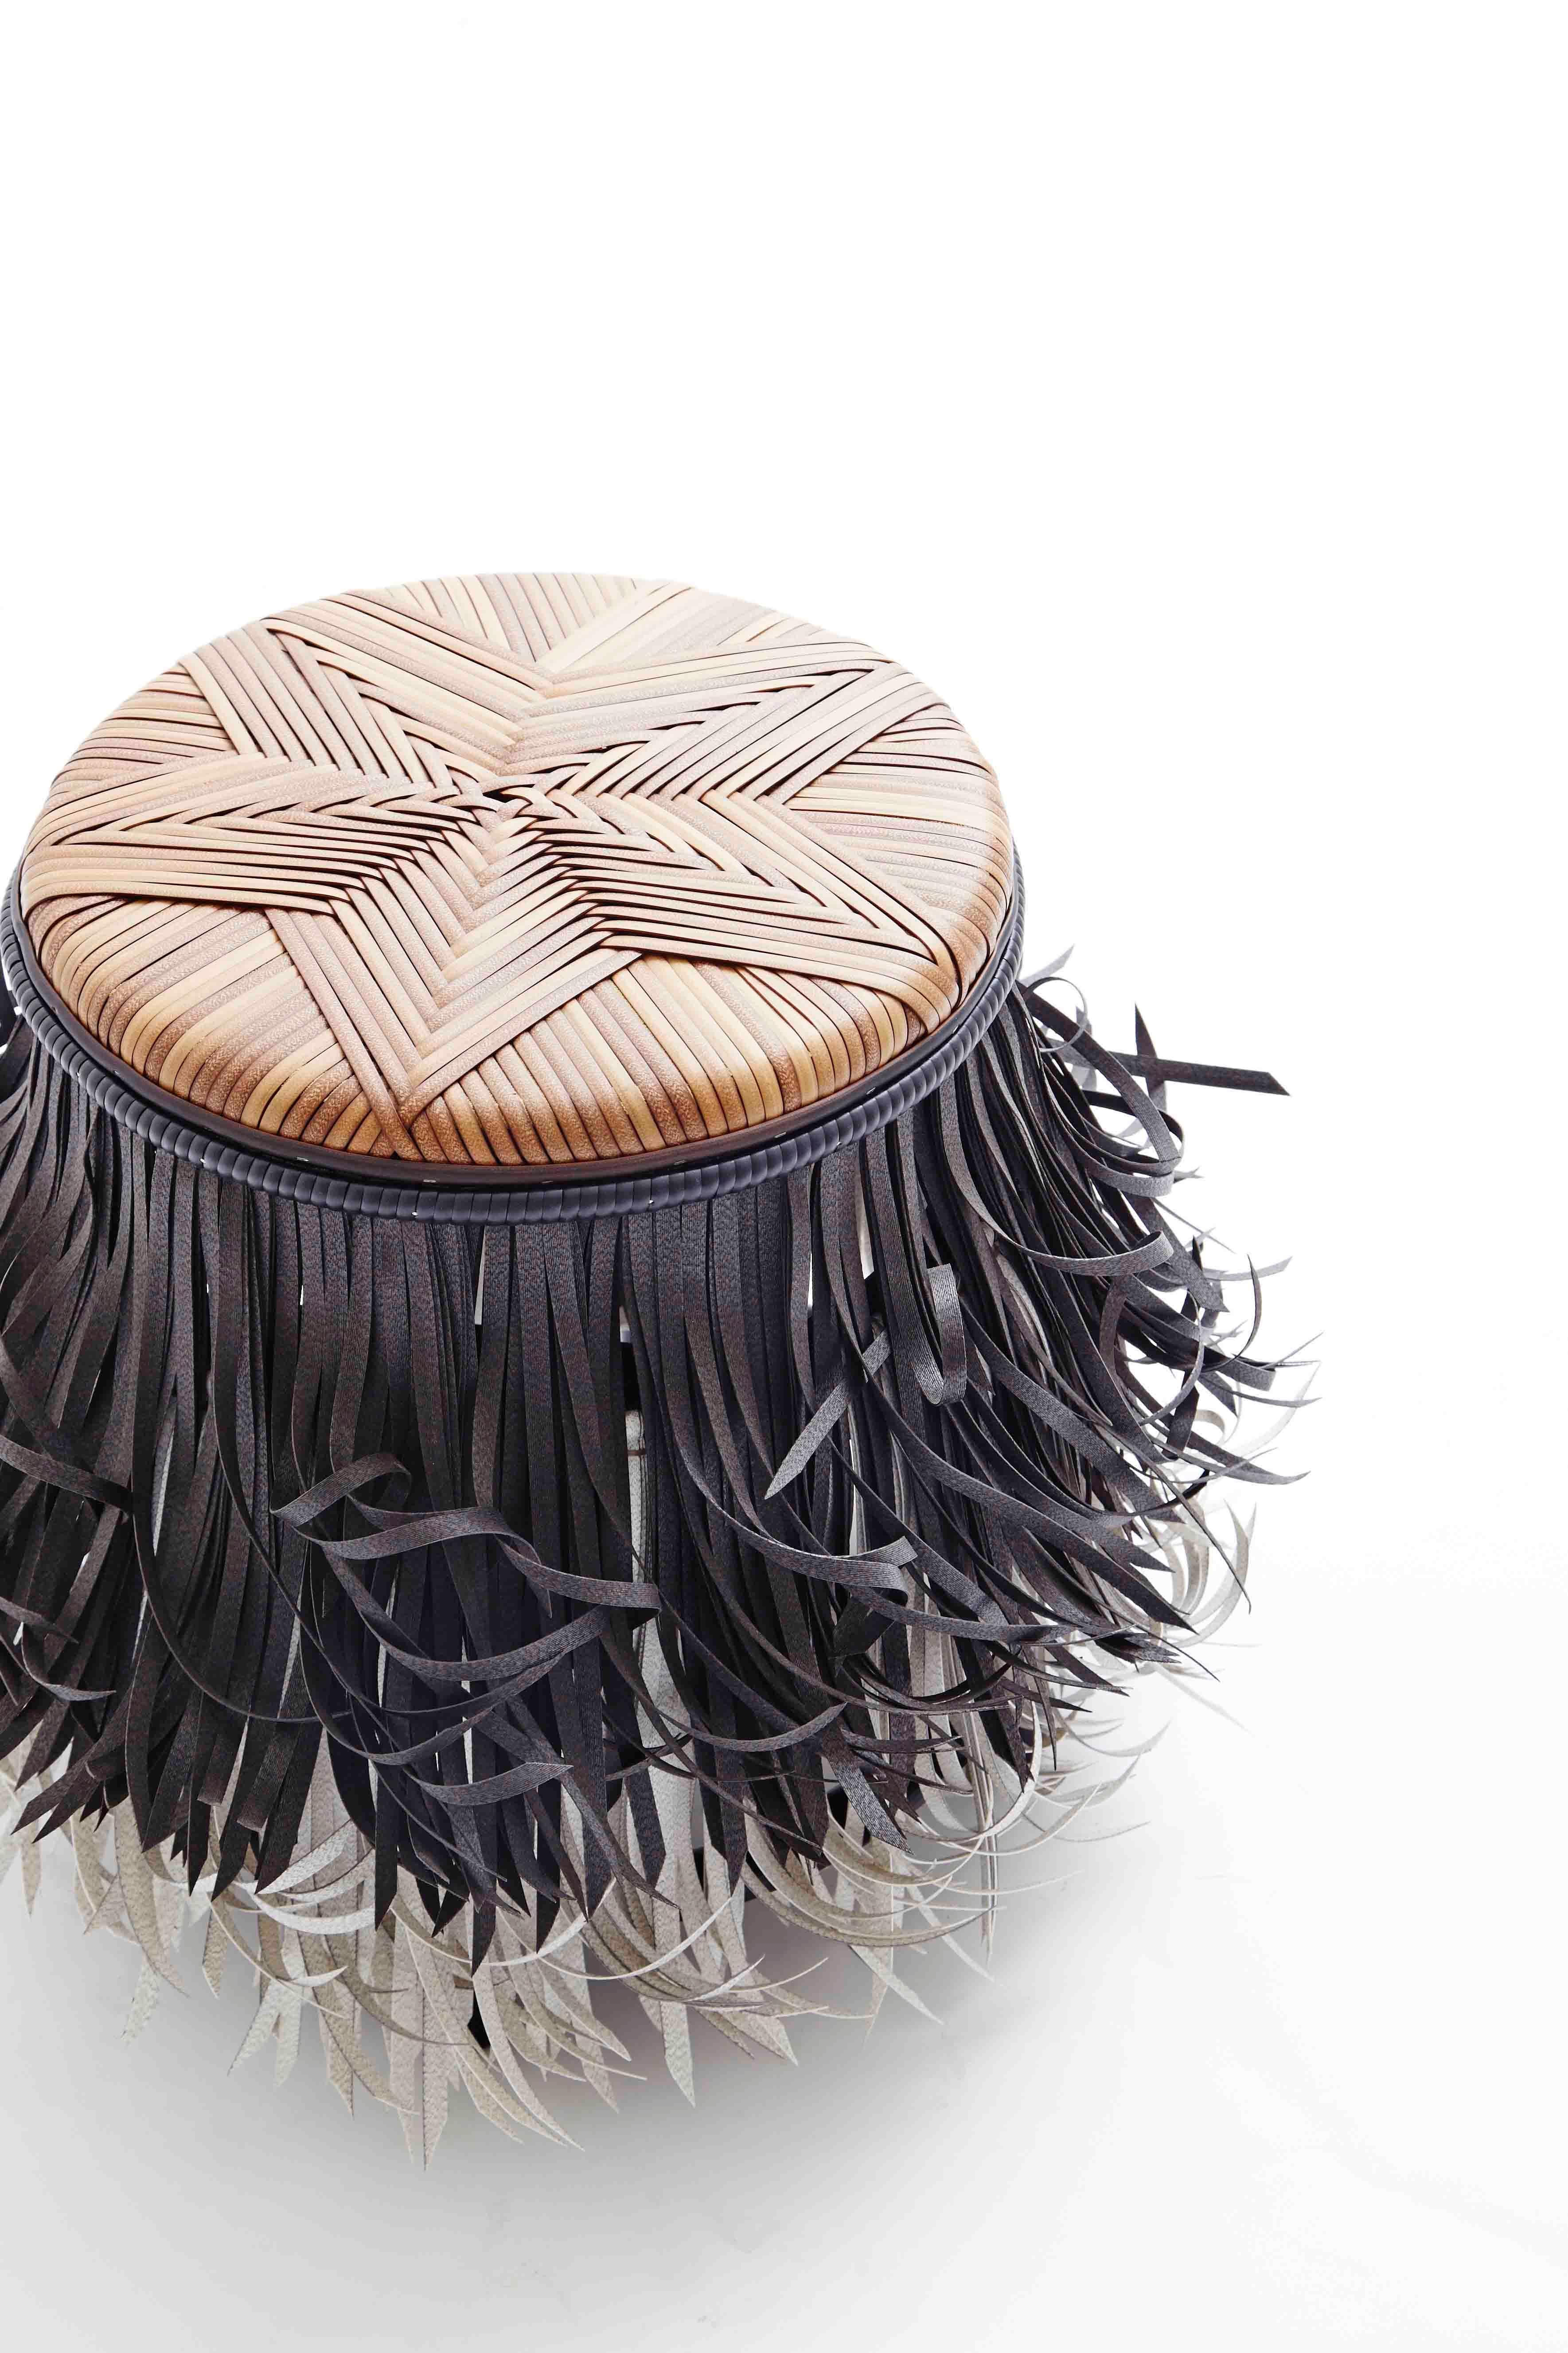 Hula was inspired by the shape and movement of Hawaiian dancers’ skirts. The seat referenced and resized the star pattern from traditional Thai sticky rice basket. The body was constructed using techniques from the palm leaf roofing tiles executed